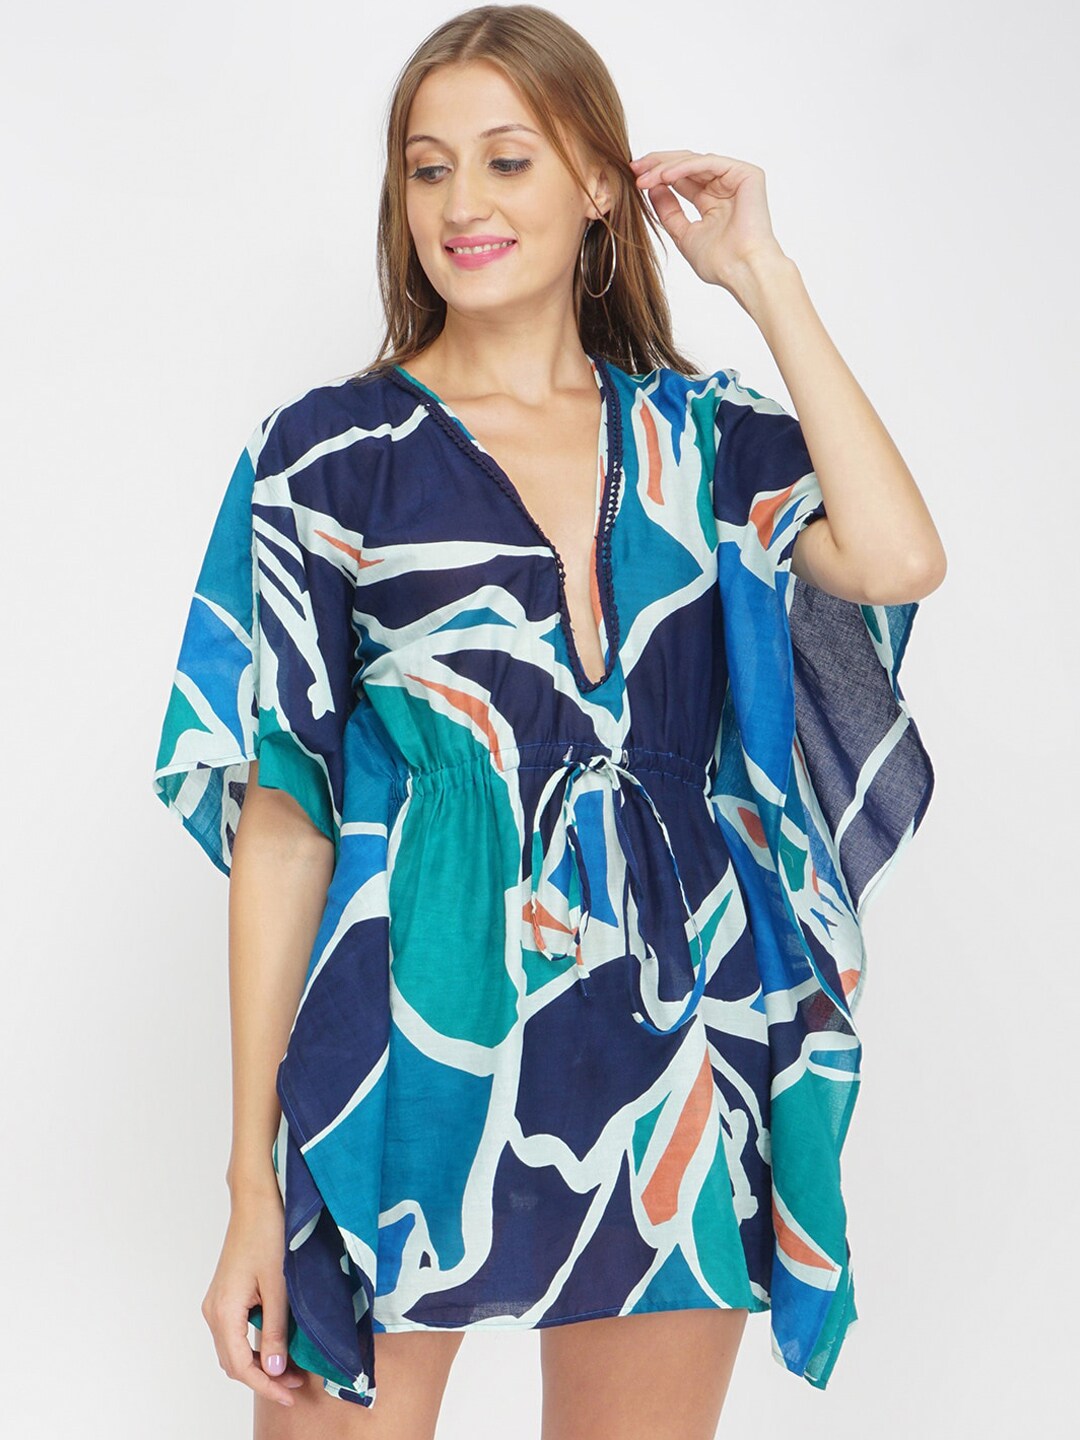 Oxolloxo Women Blue & White Printed Cotton Kaftan Cover-Up Dress Price in India